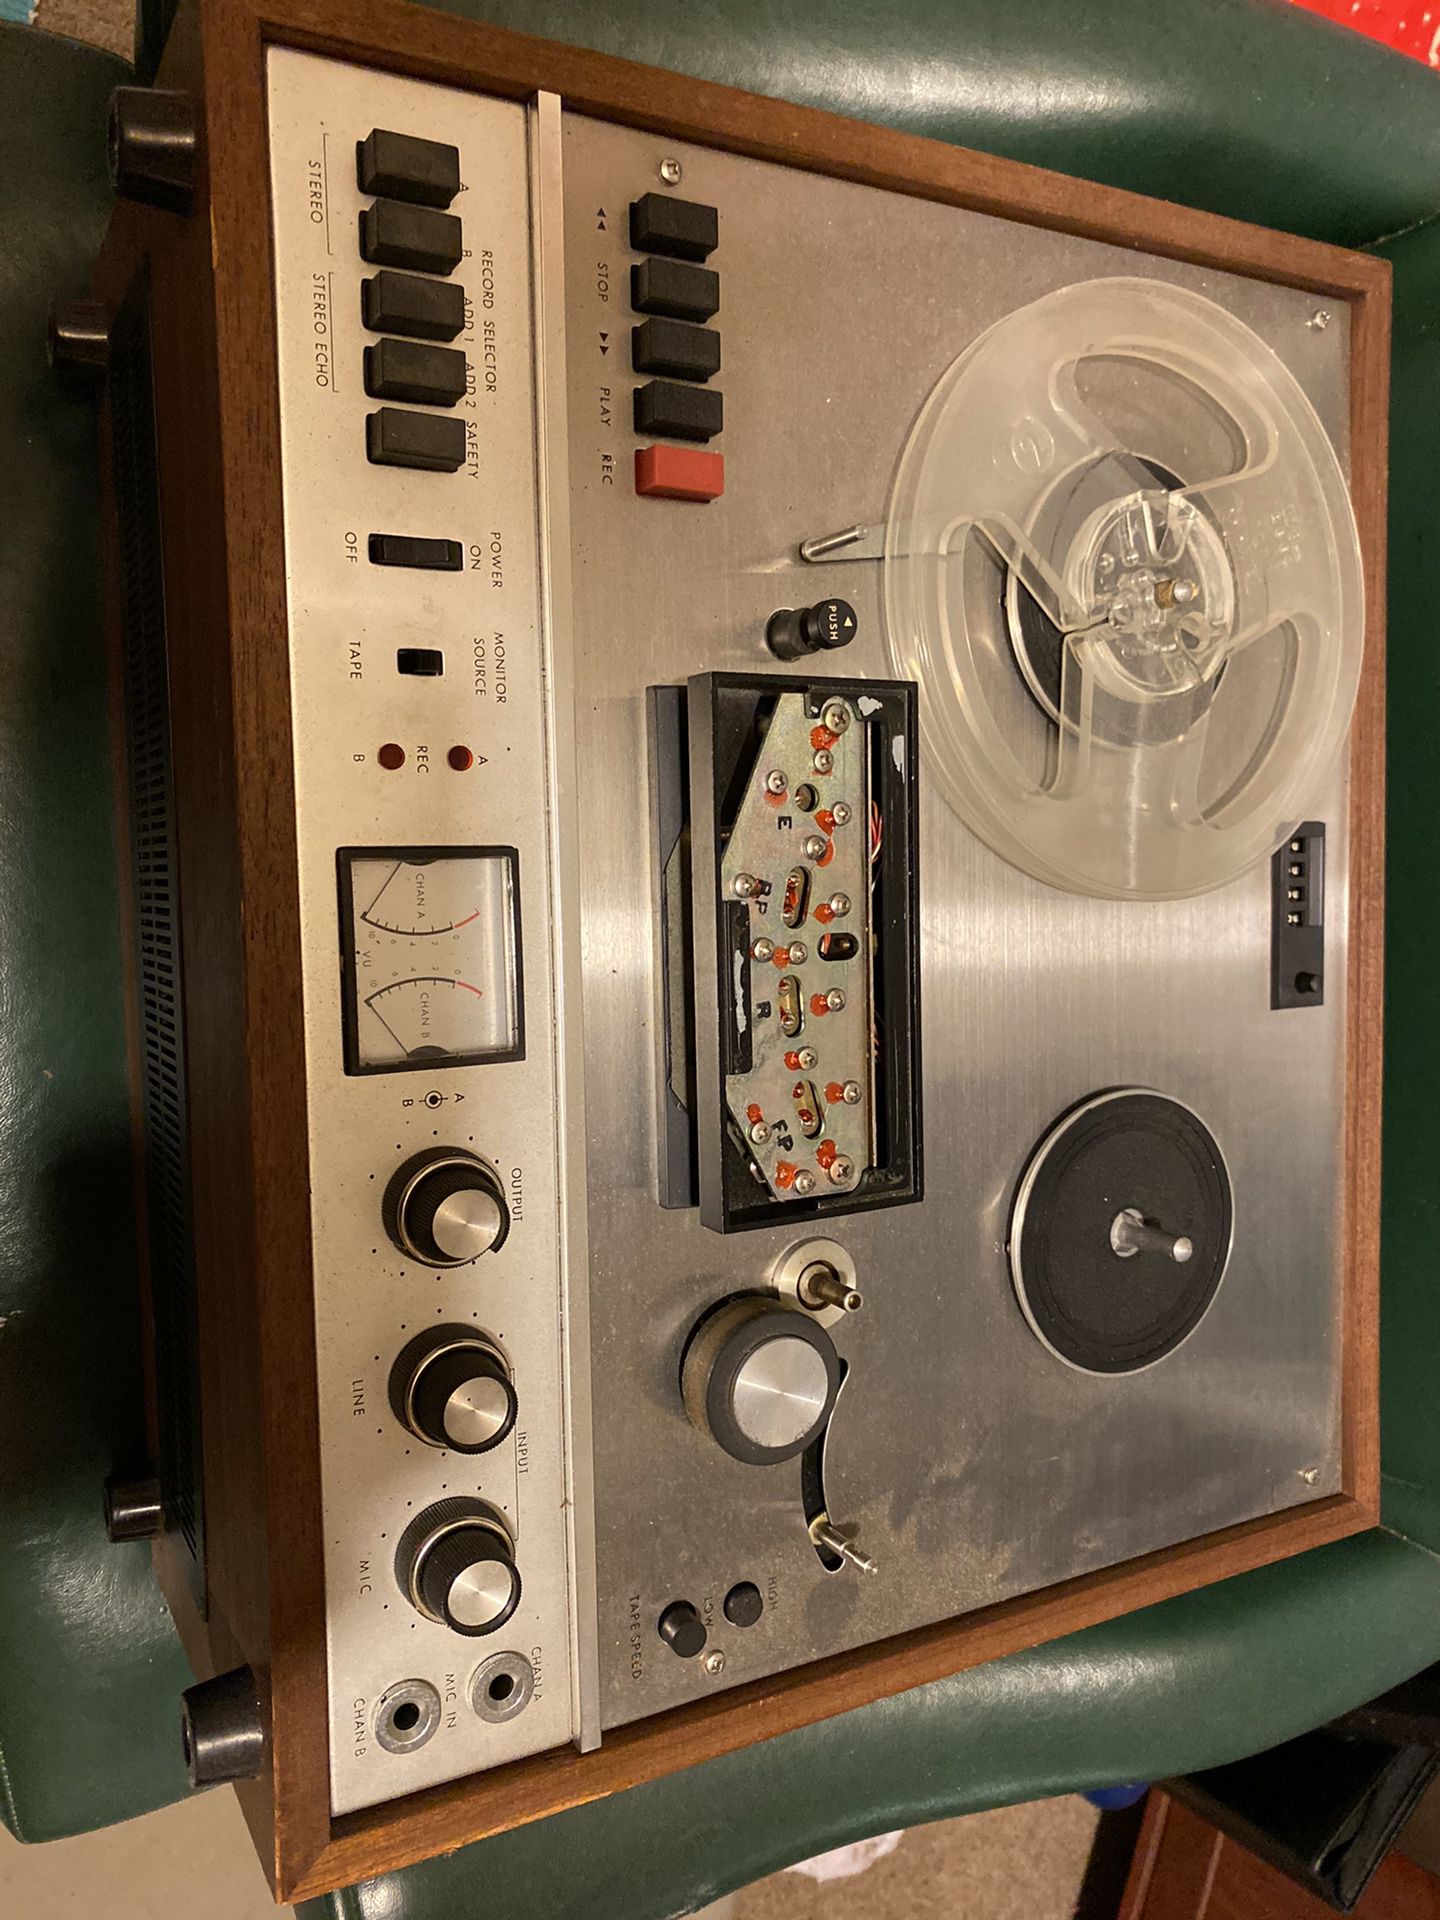 Teac reel to reel for Sale in Raleigh, NC - OfferUp